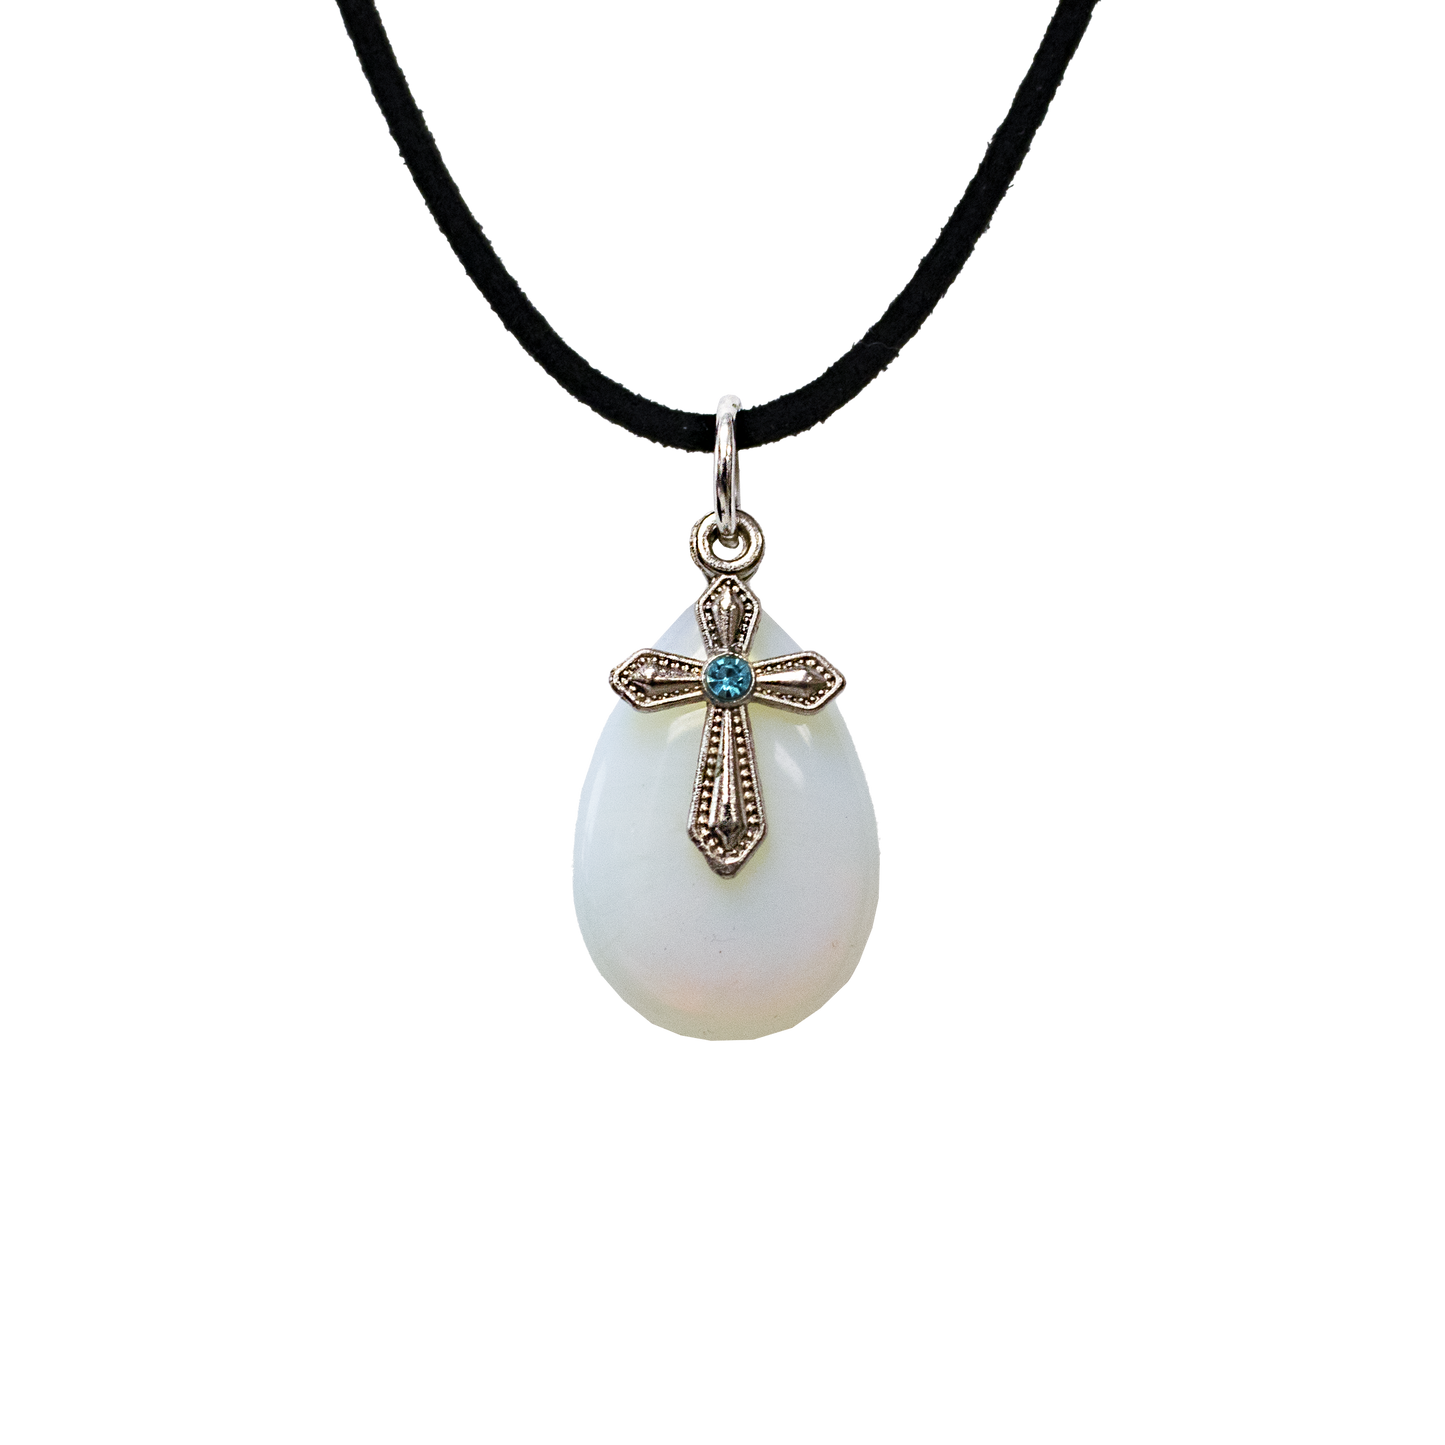 Milky iridescent Girasol Quartz tear drop pendant with a decorative cross pensant layered on top with a Suede Cord 